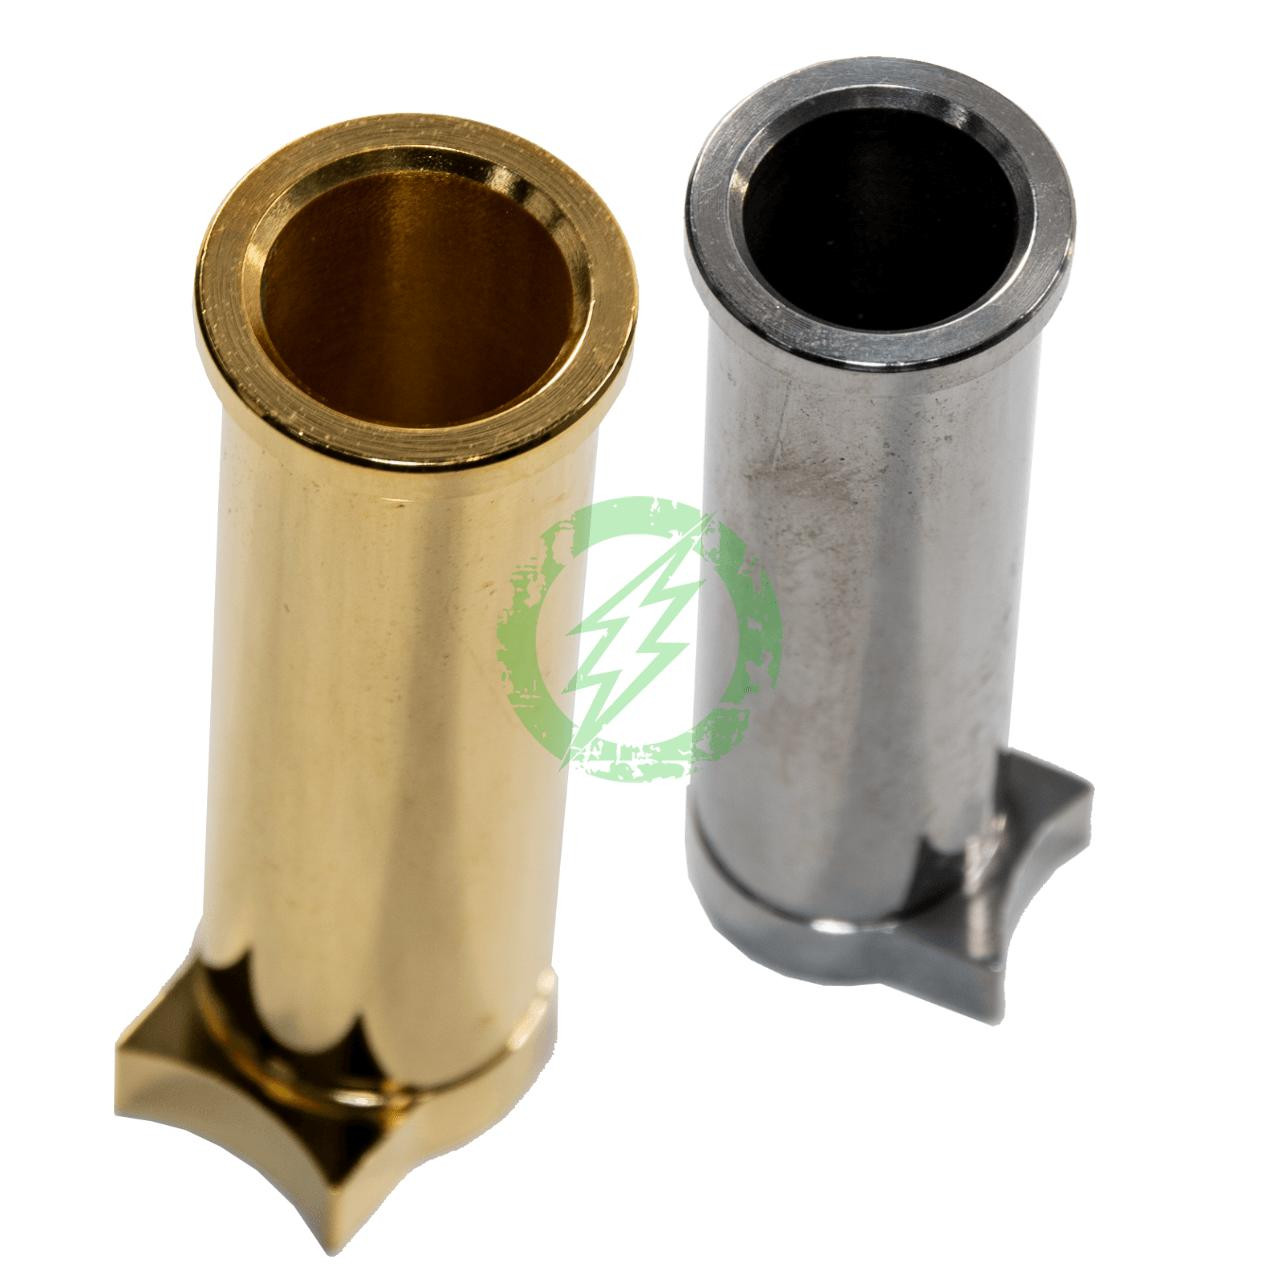 Airsoft Masterpiece Custom Airsoft Masterpiece Steel Recoil Plug for HiCAPA 5.1 